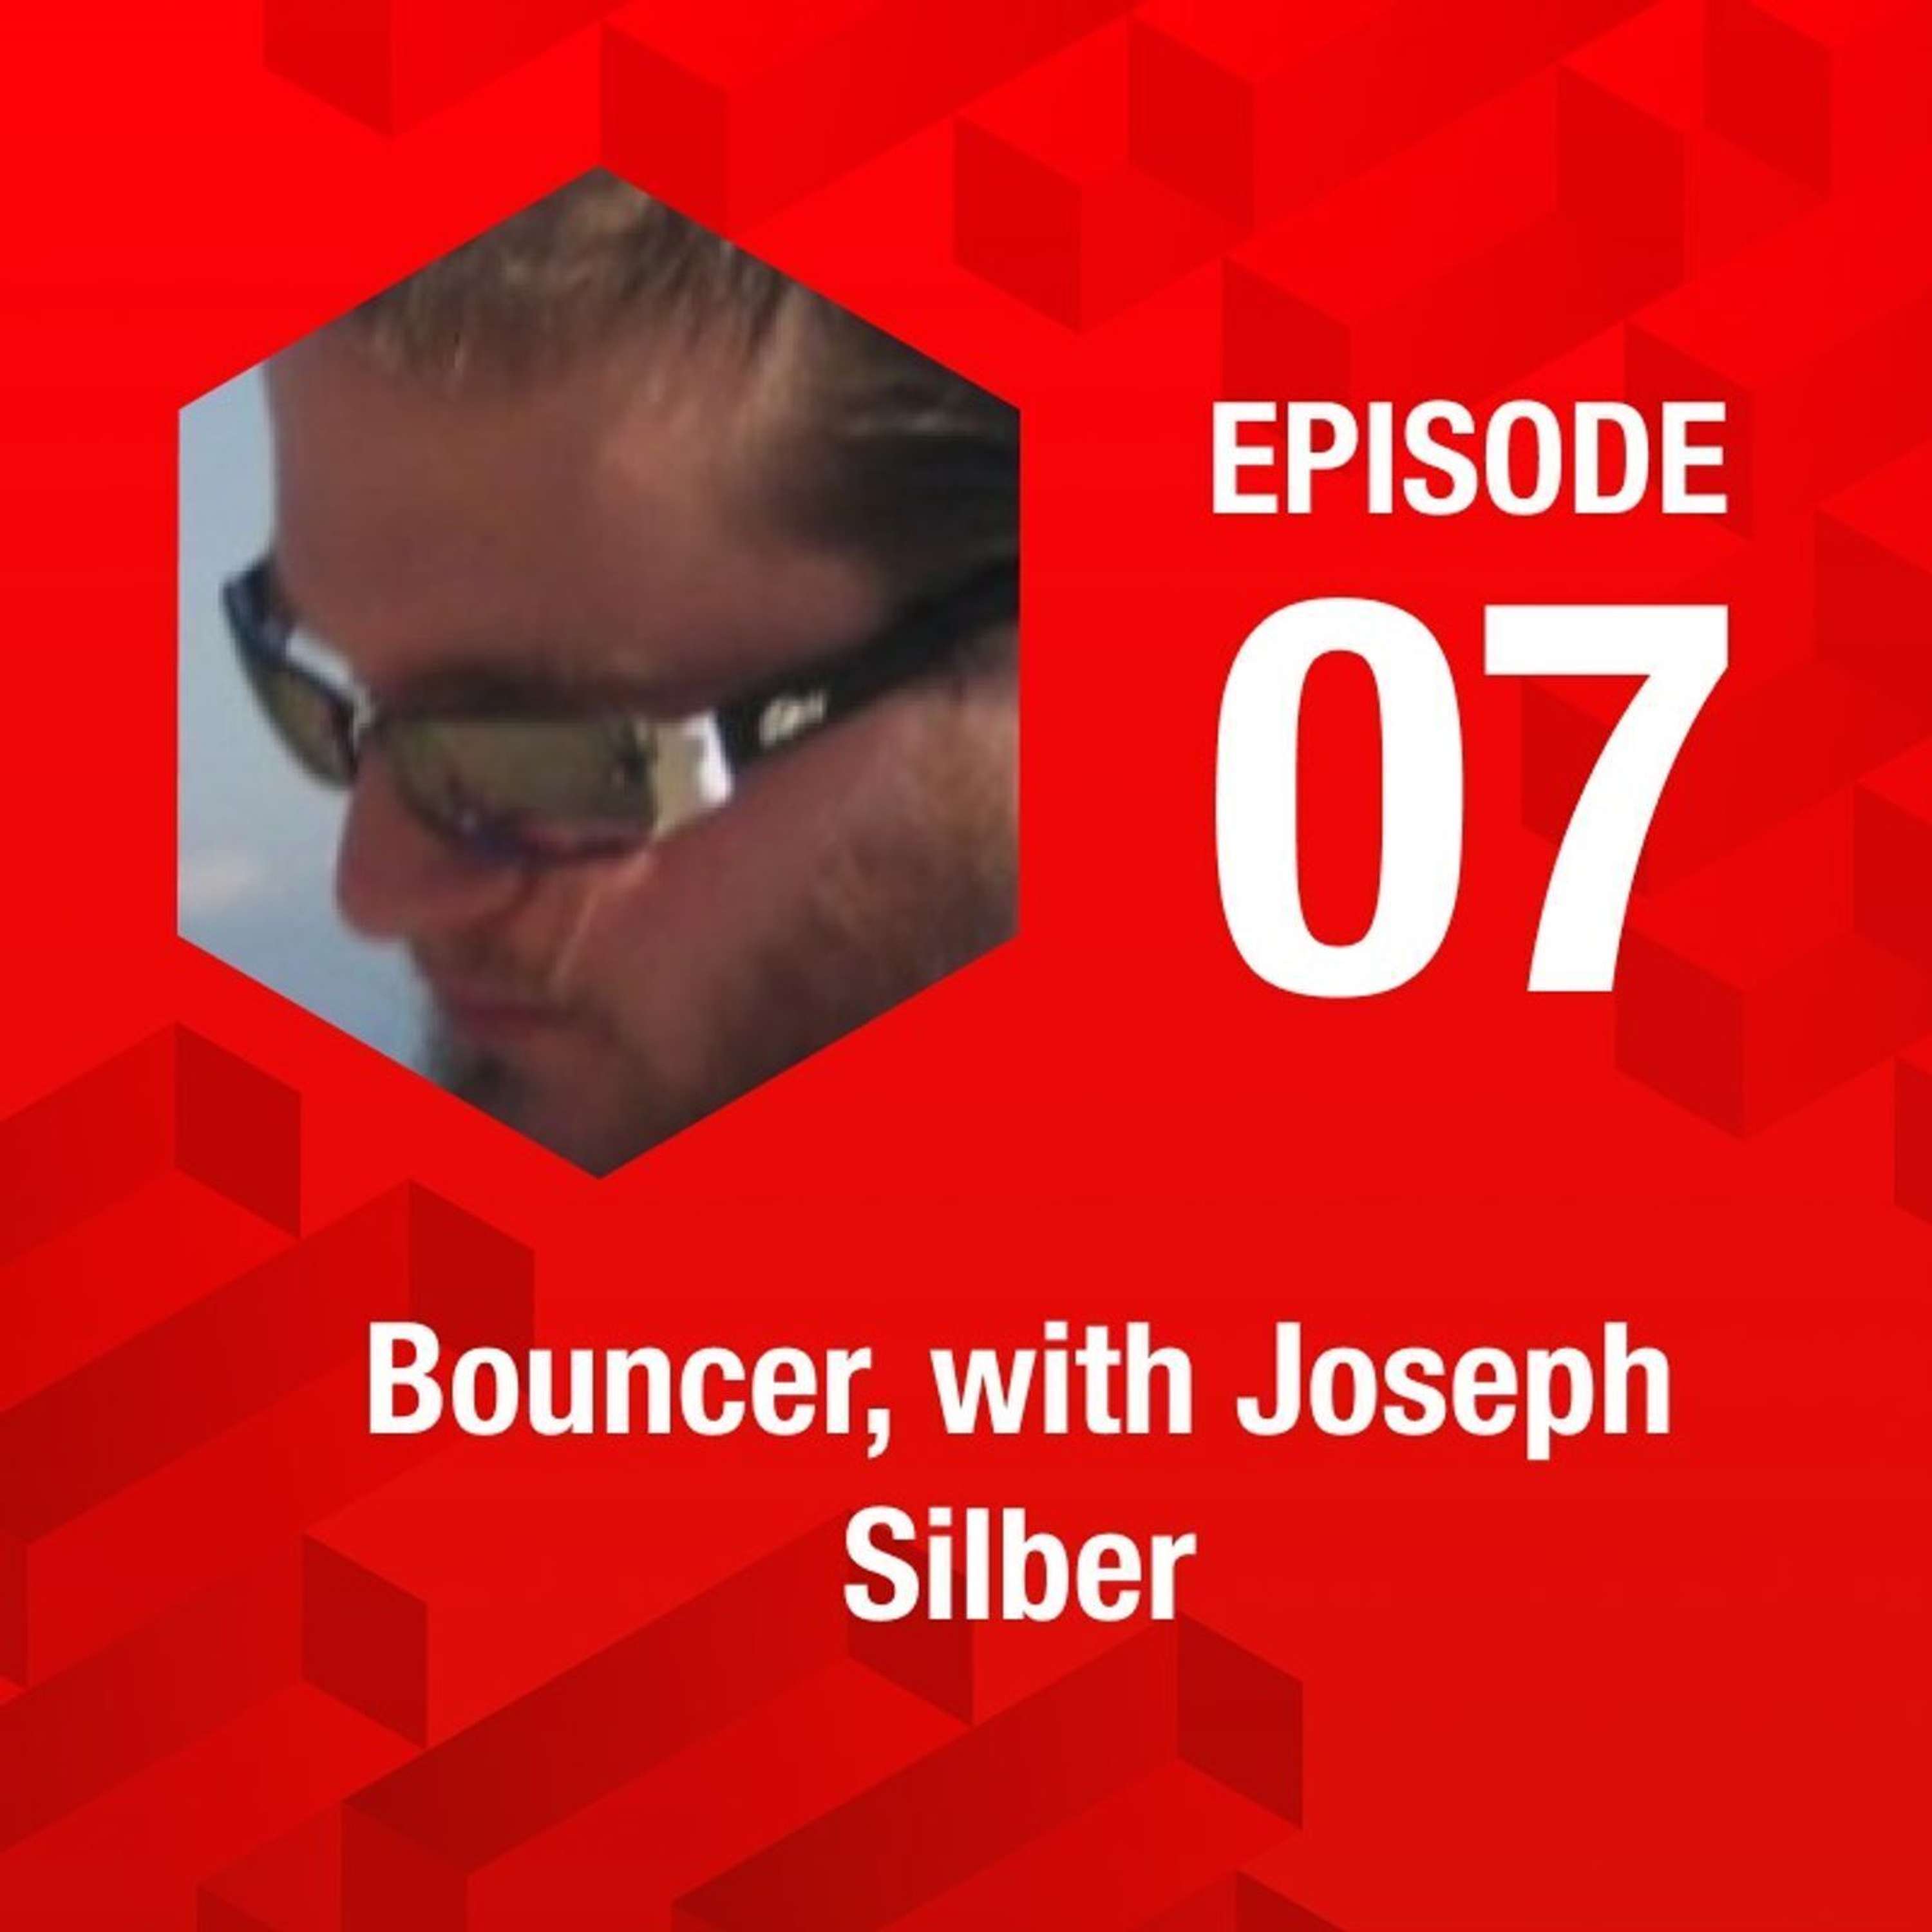 Bouncer, with Joseph Silber